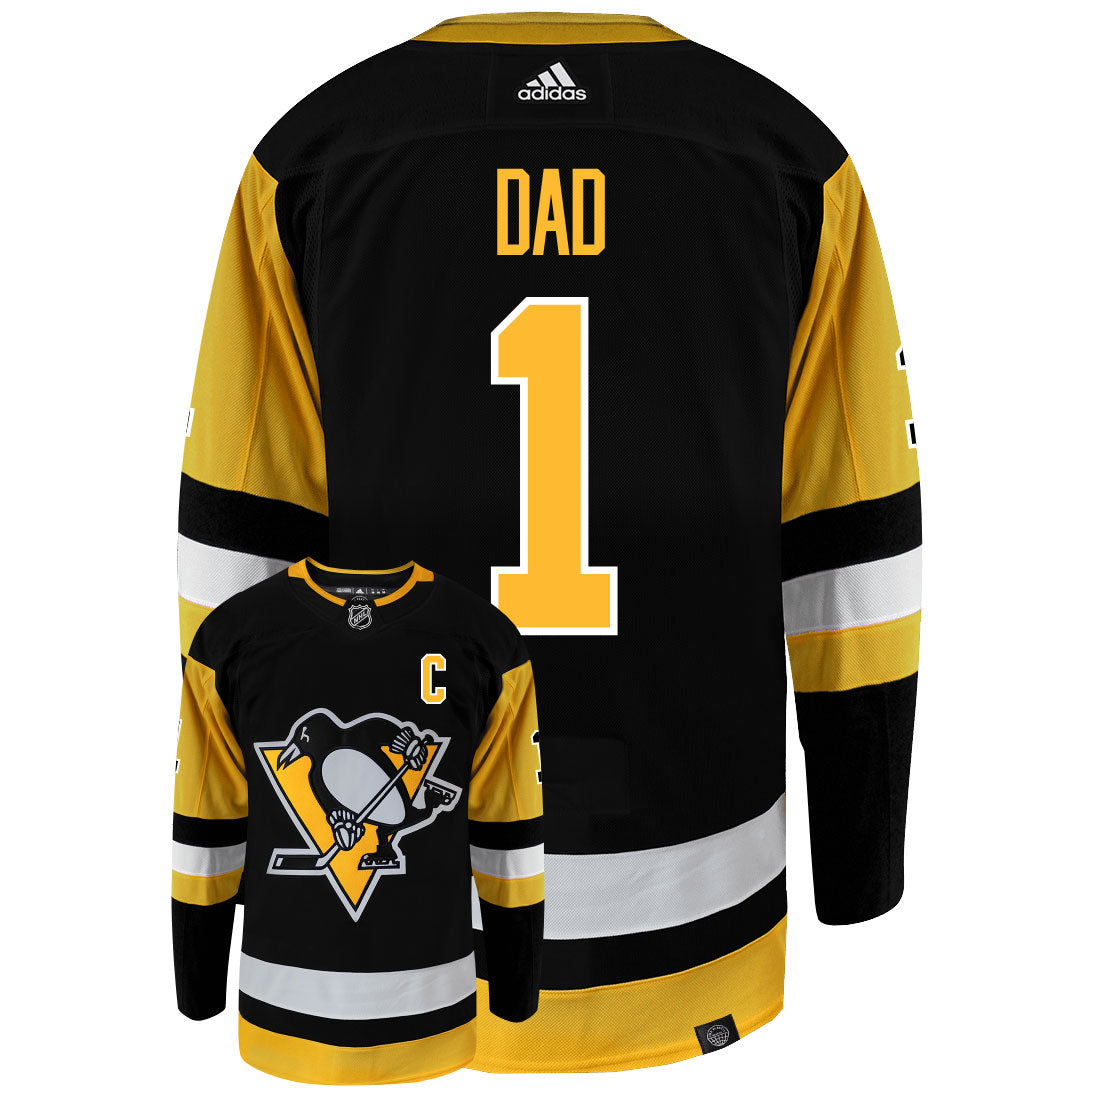 Pittsburgh Penguins Dad Number One Adidas Primegreen Authentic NHL Hockey Jersey